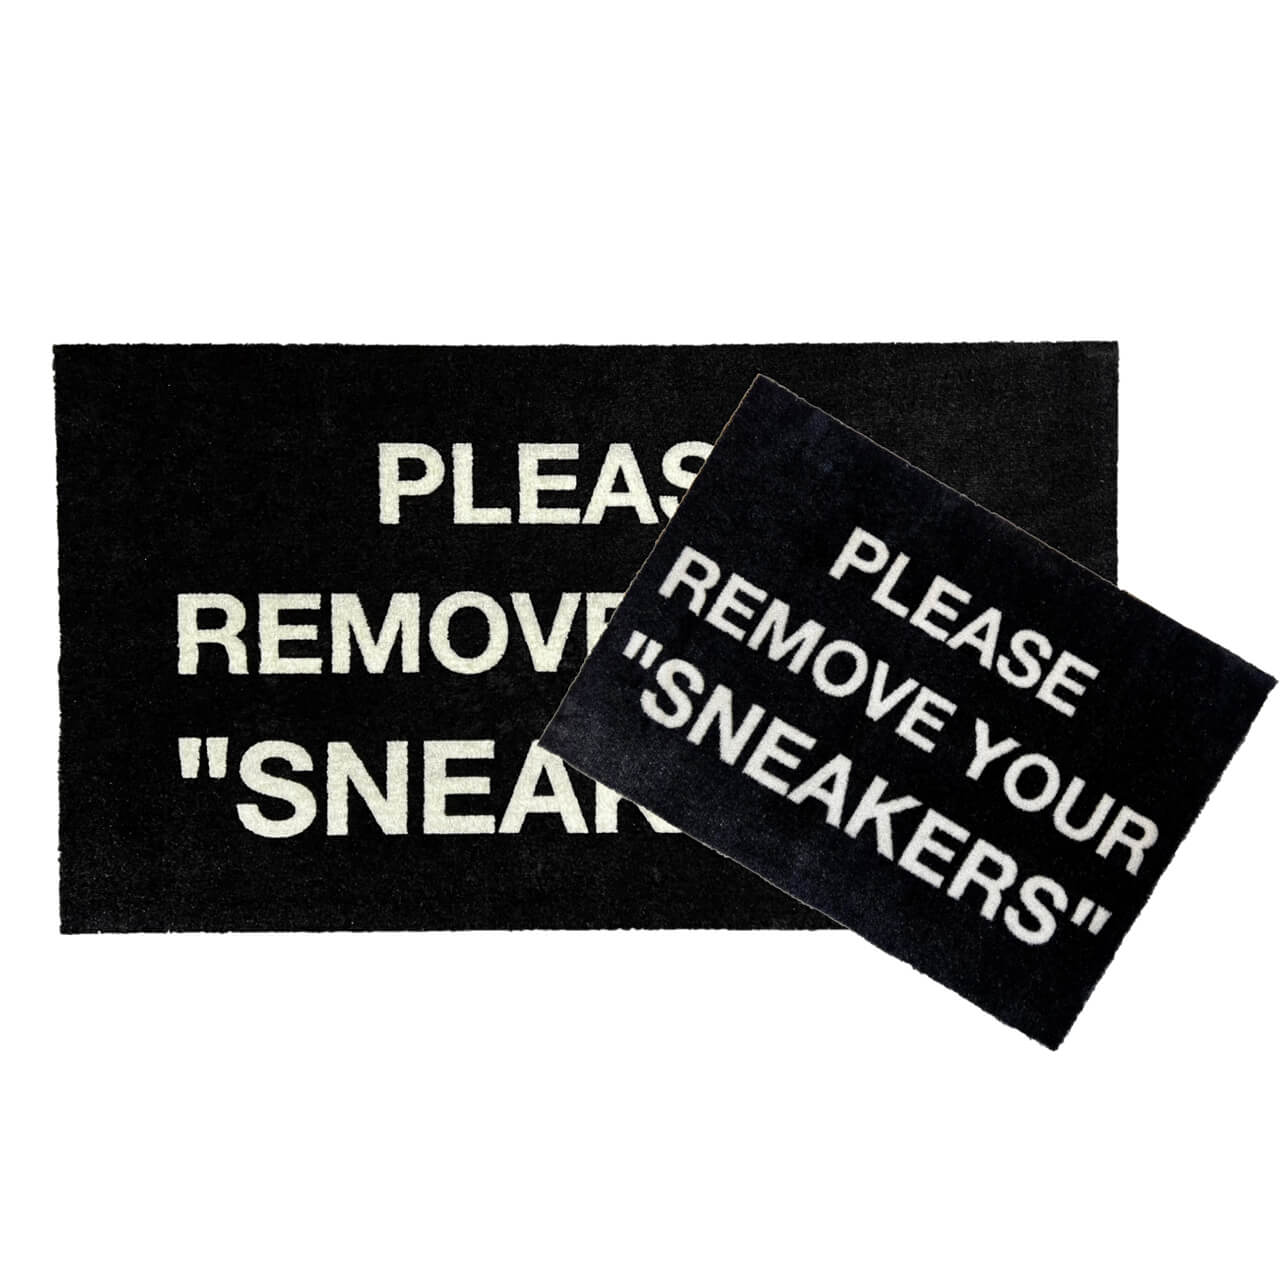 PLEASE REMOVE YOUR "SNEAKERS"